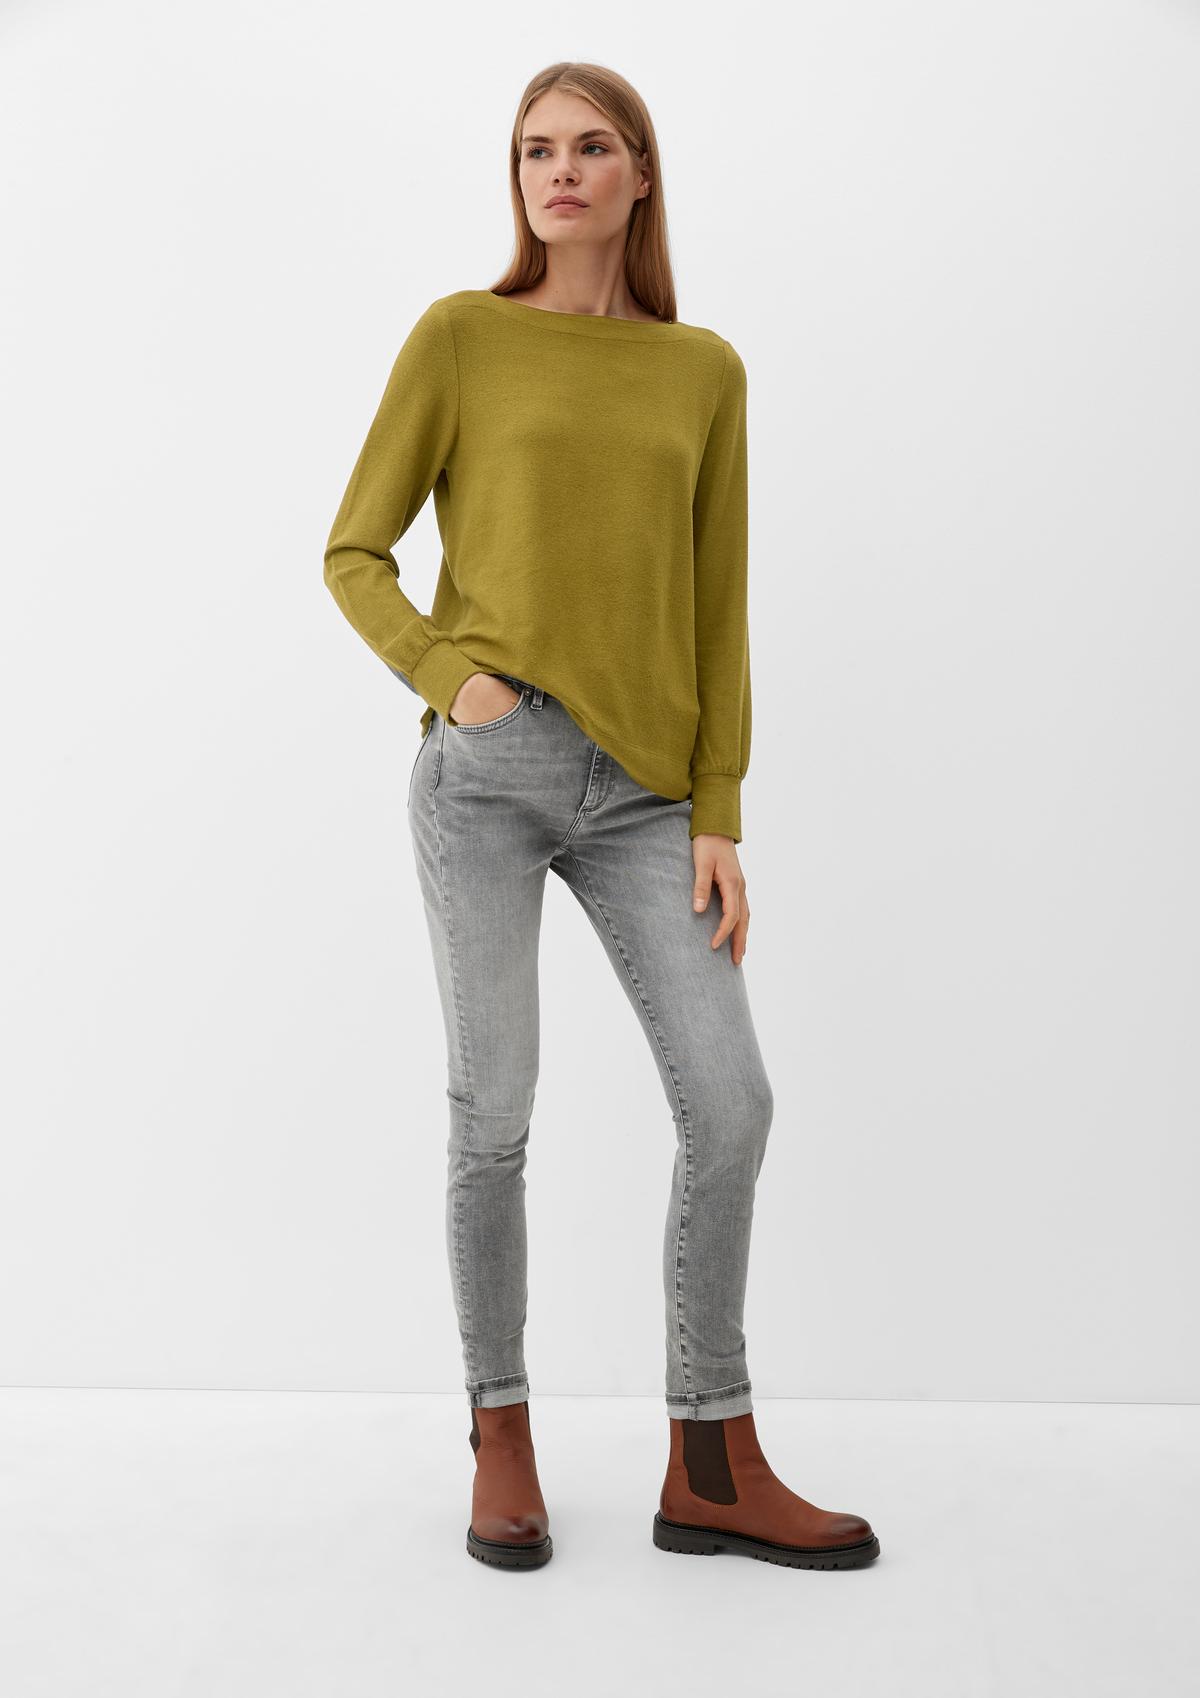 s.Oliver Long sleeve top with a melange finish